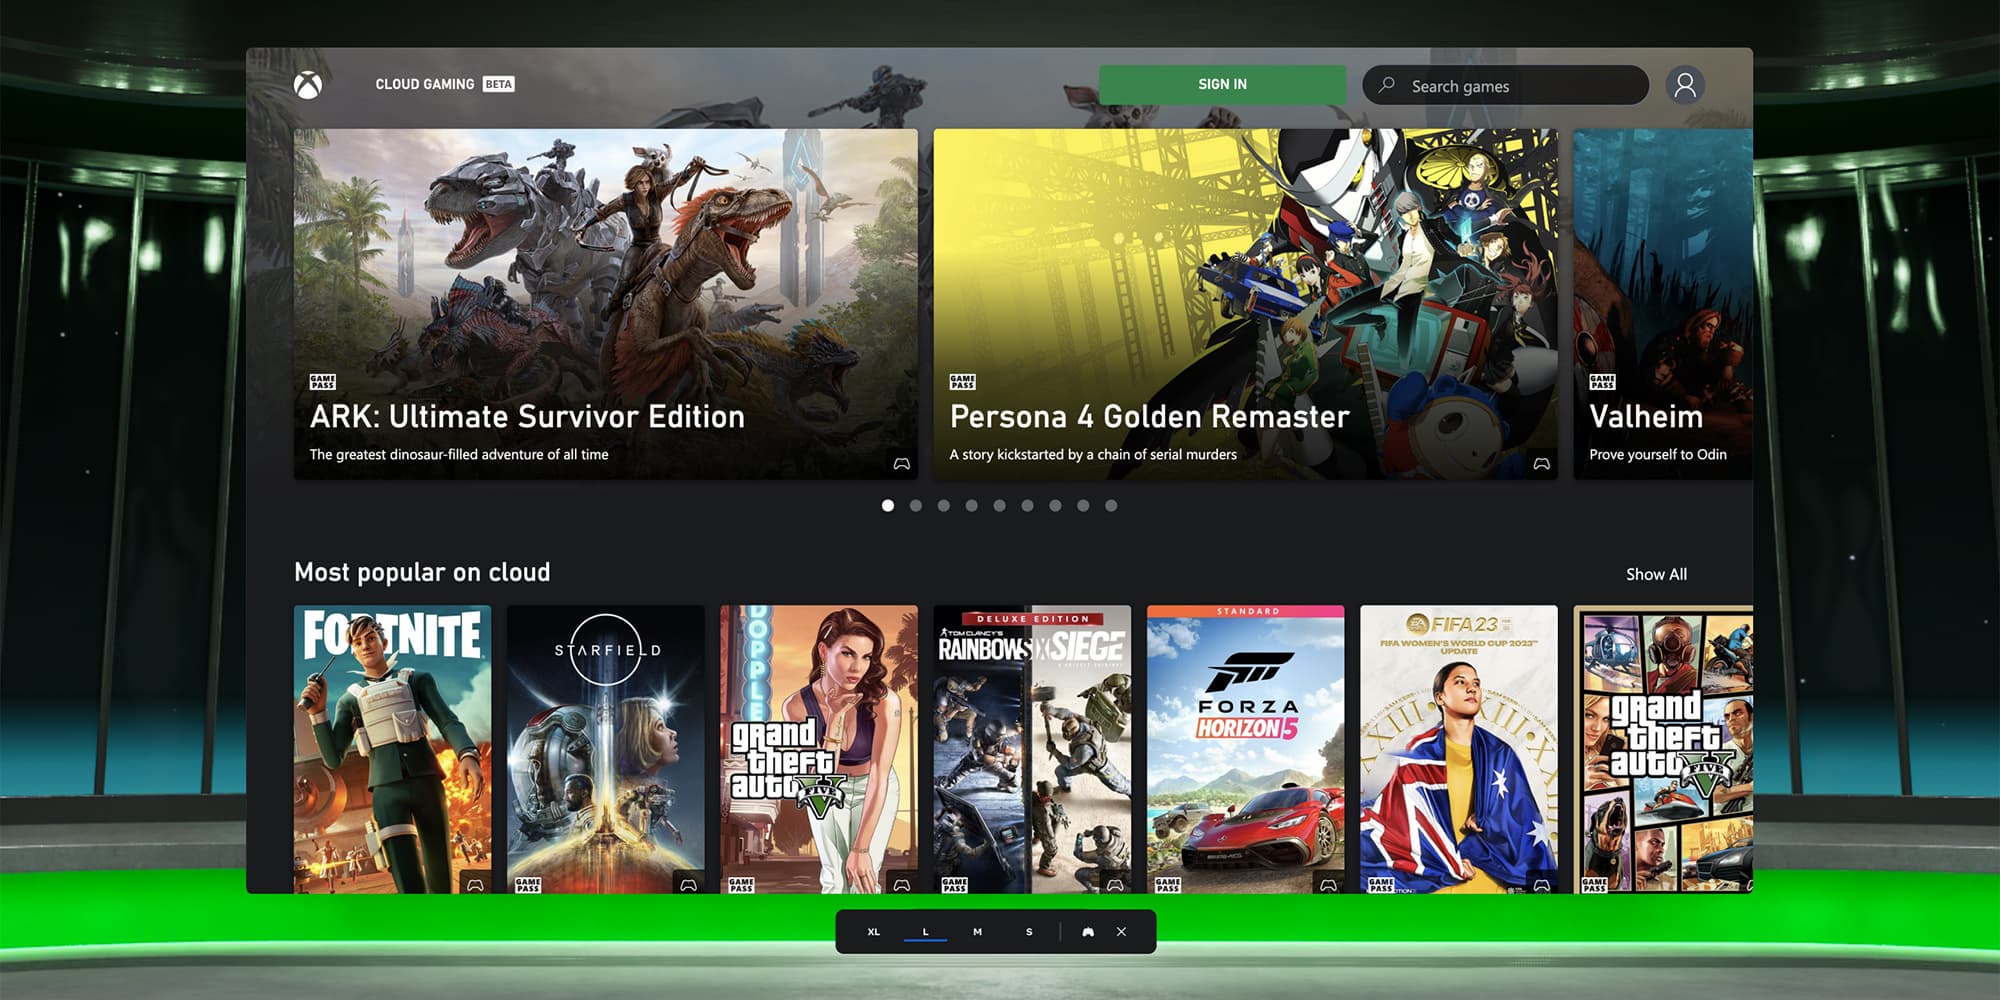 Xbox Cloud Gaming, Software